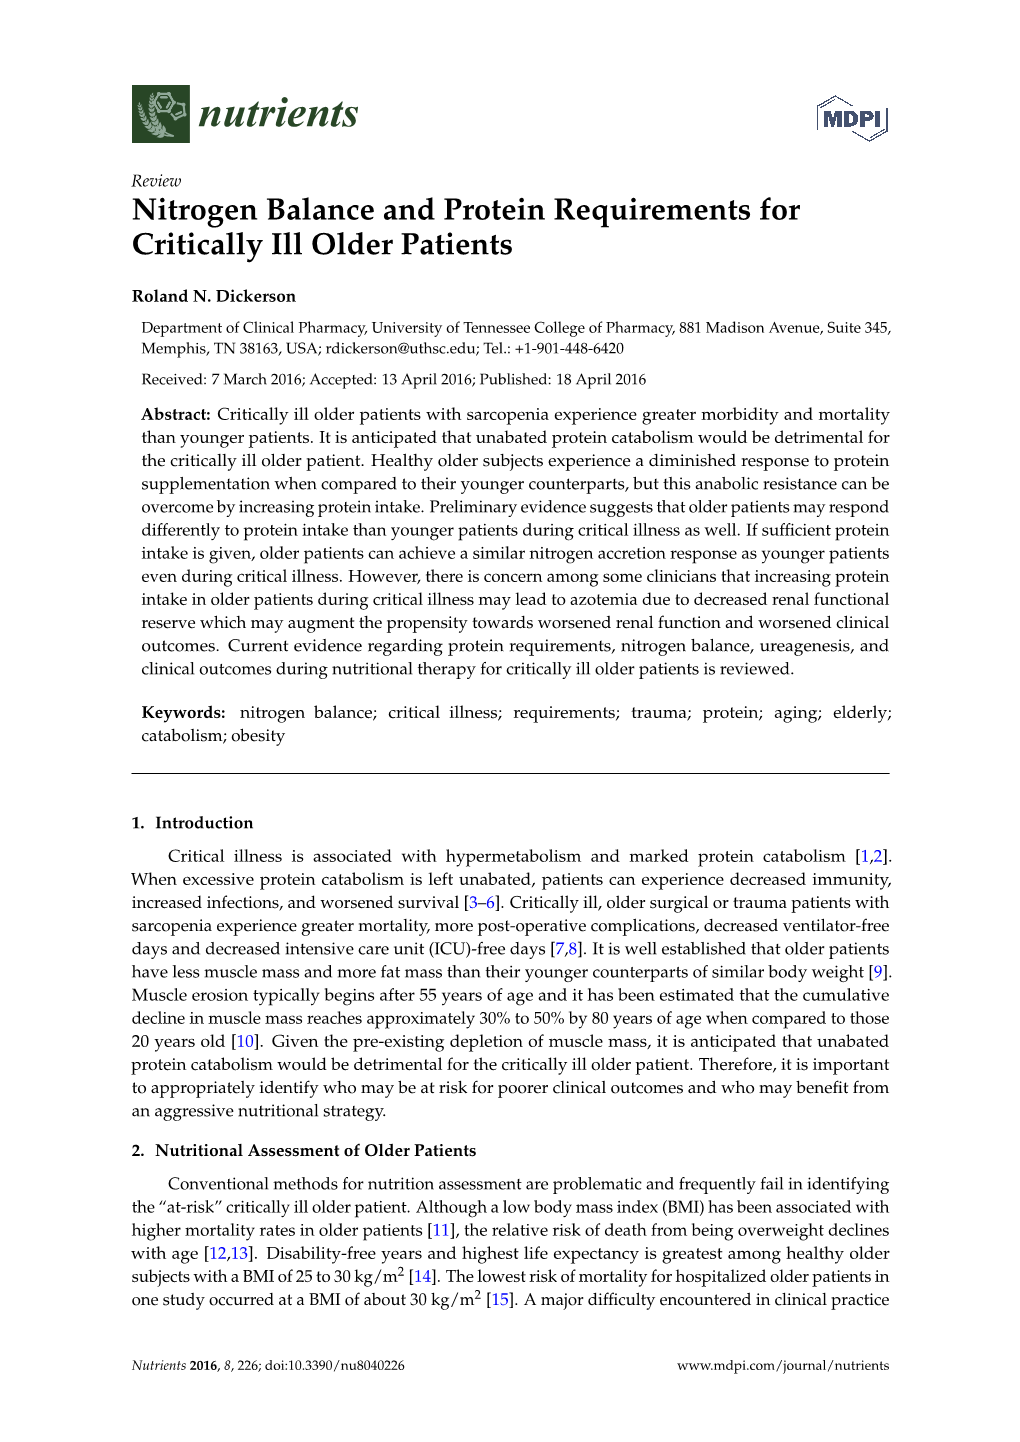 Nitrogen Balance and Protein Requirements for Critically Ill Older Patients